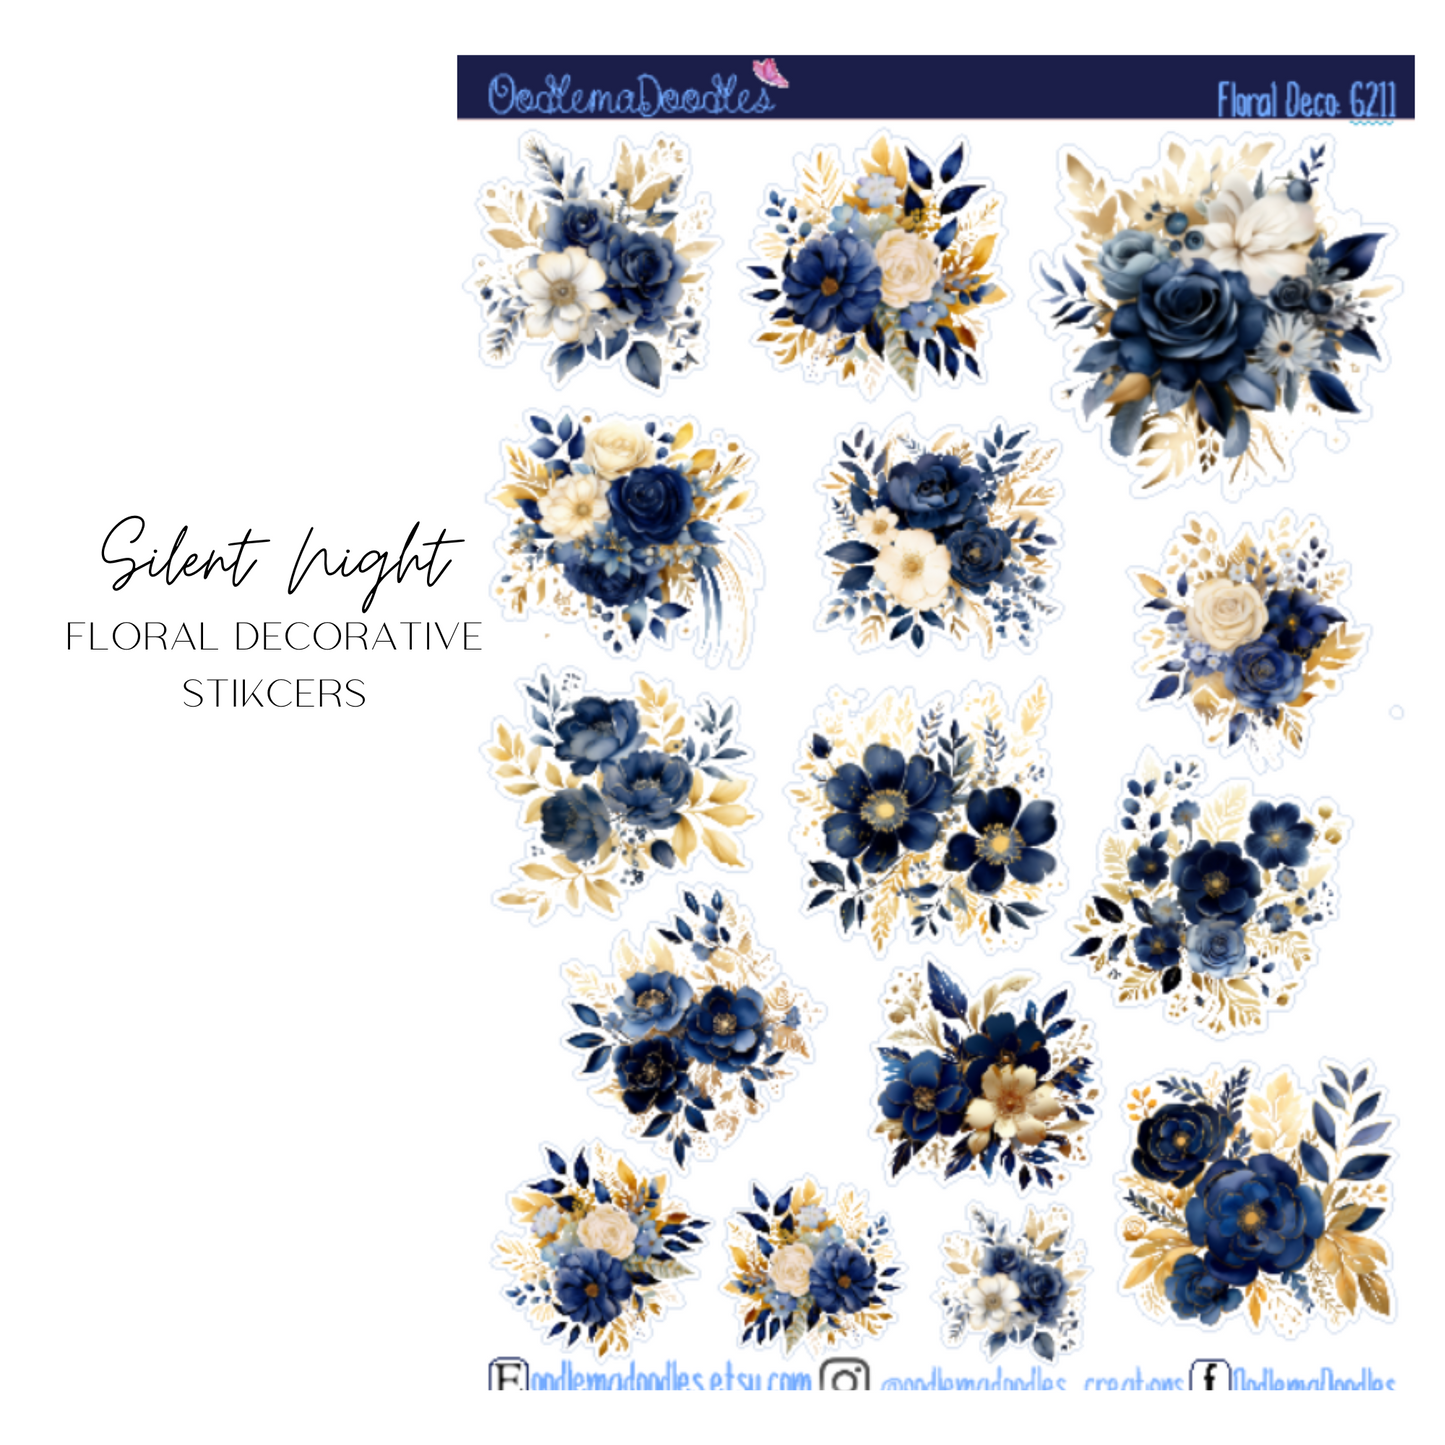 Silent Night Floral Decorative Stickers